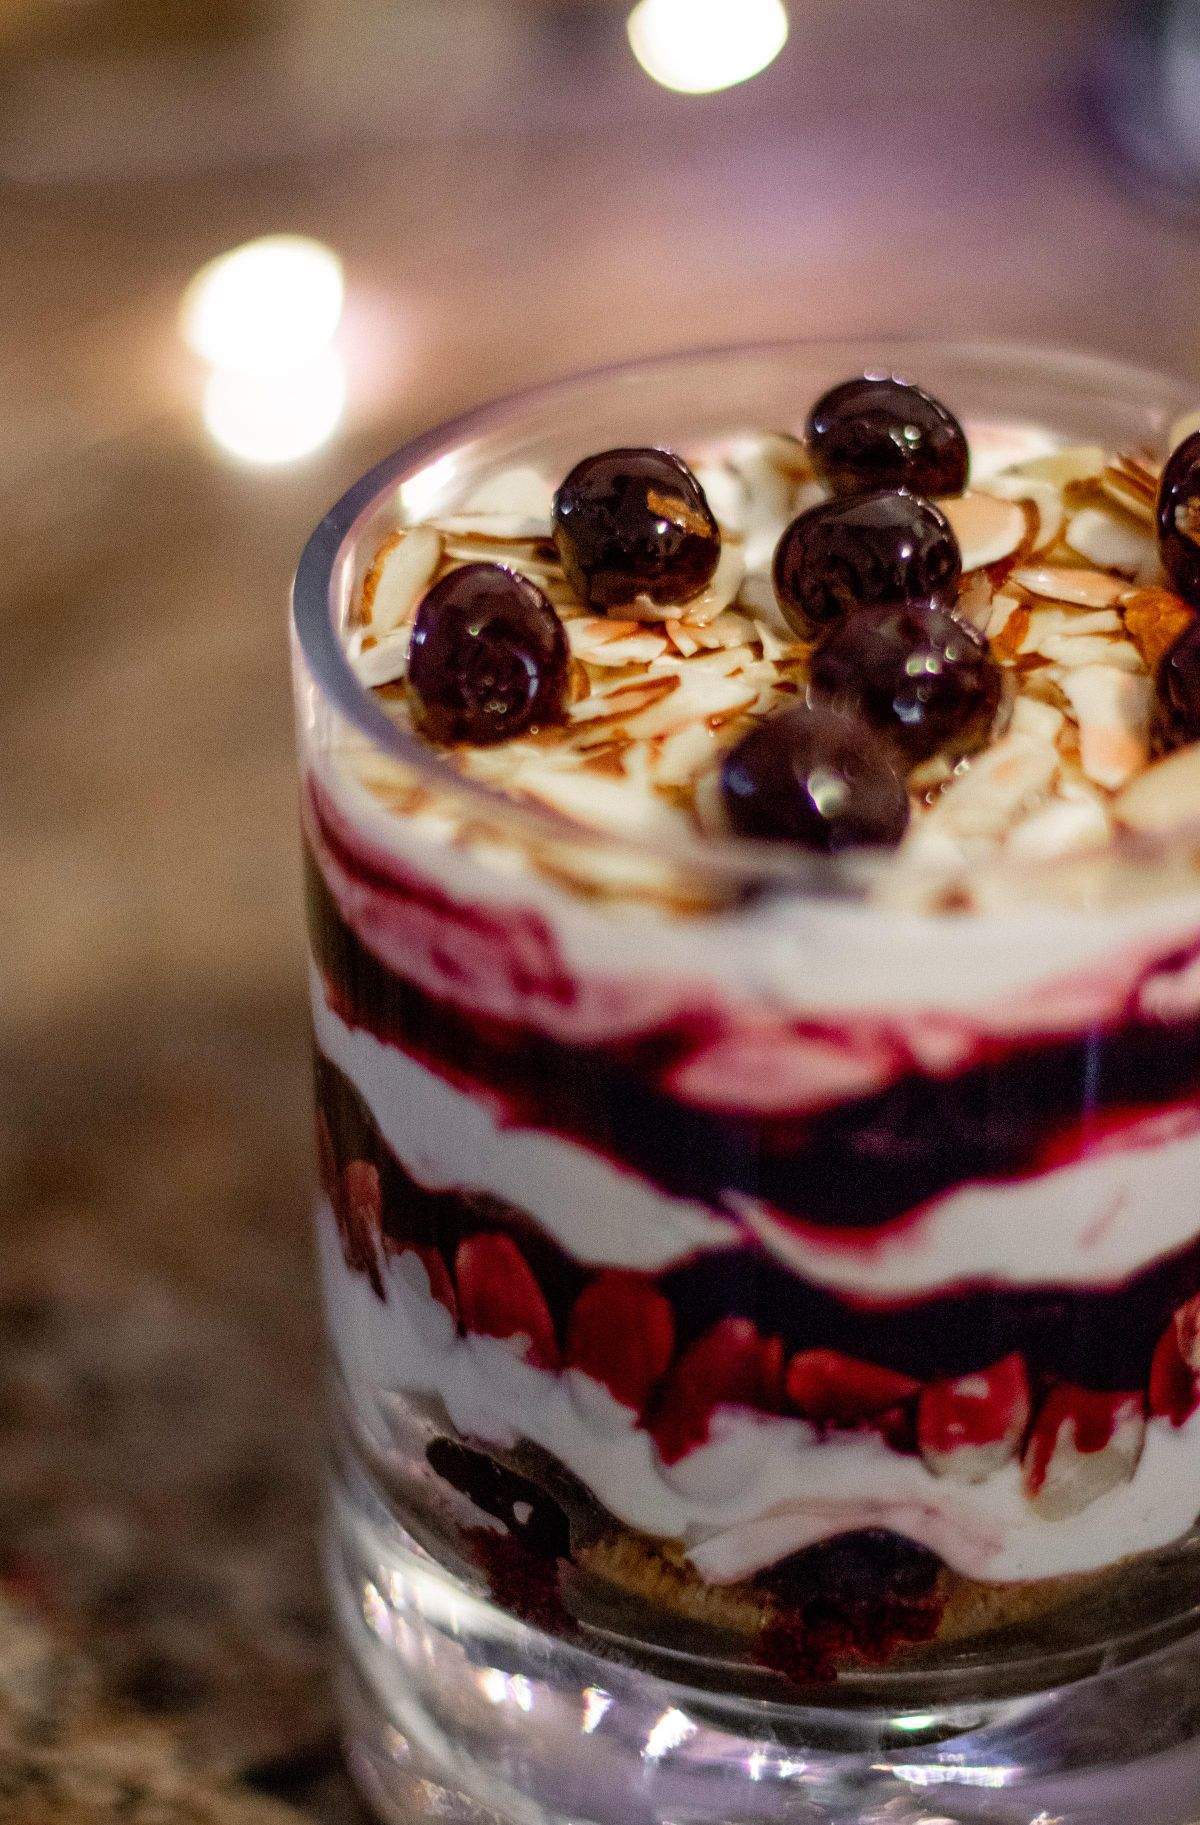 Luna pastry chef updated his grandmother’s cherry-graham cracker trifle for Christmas. (Courtesy of Taylor Siok)